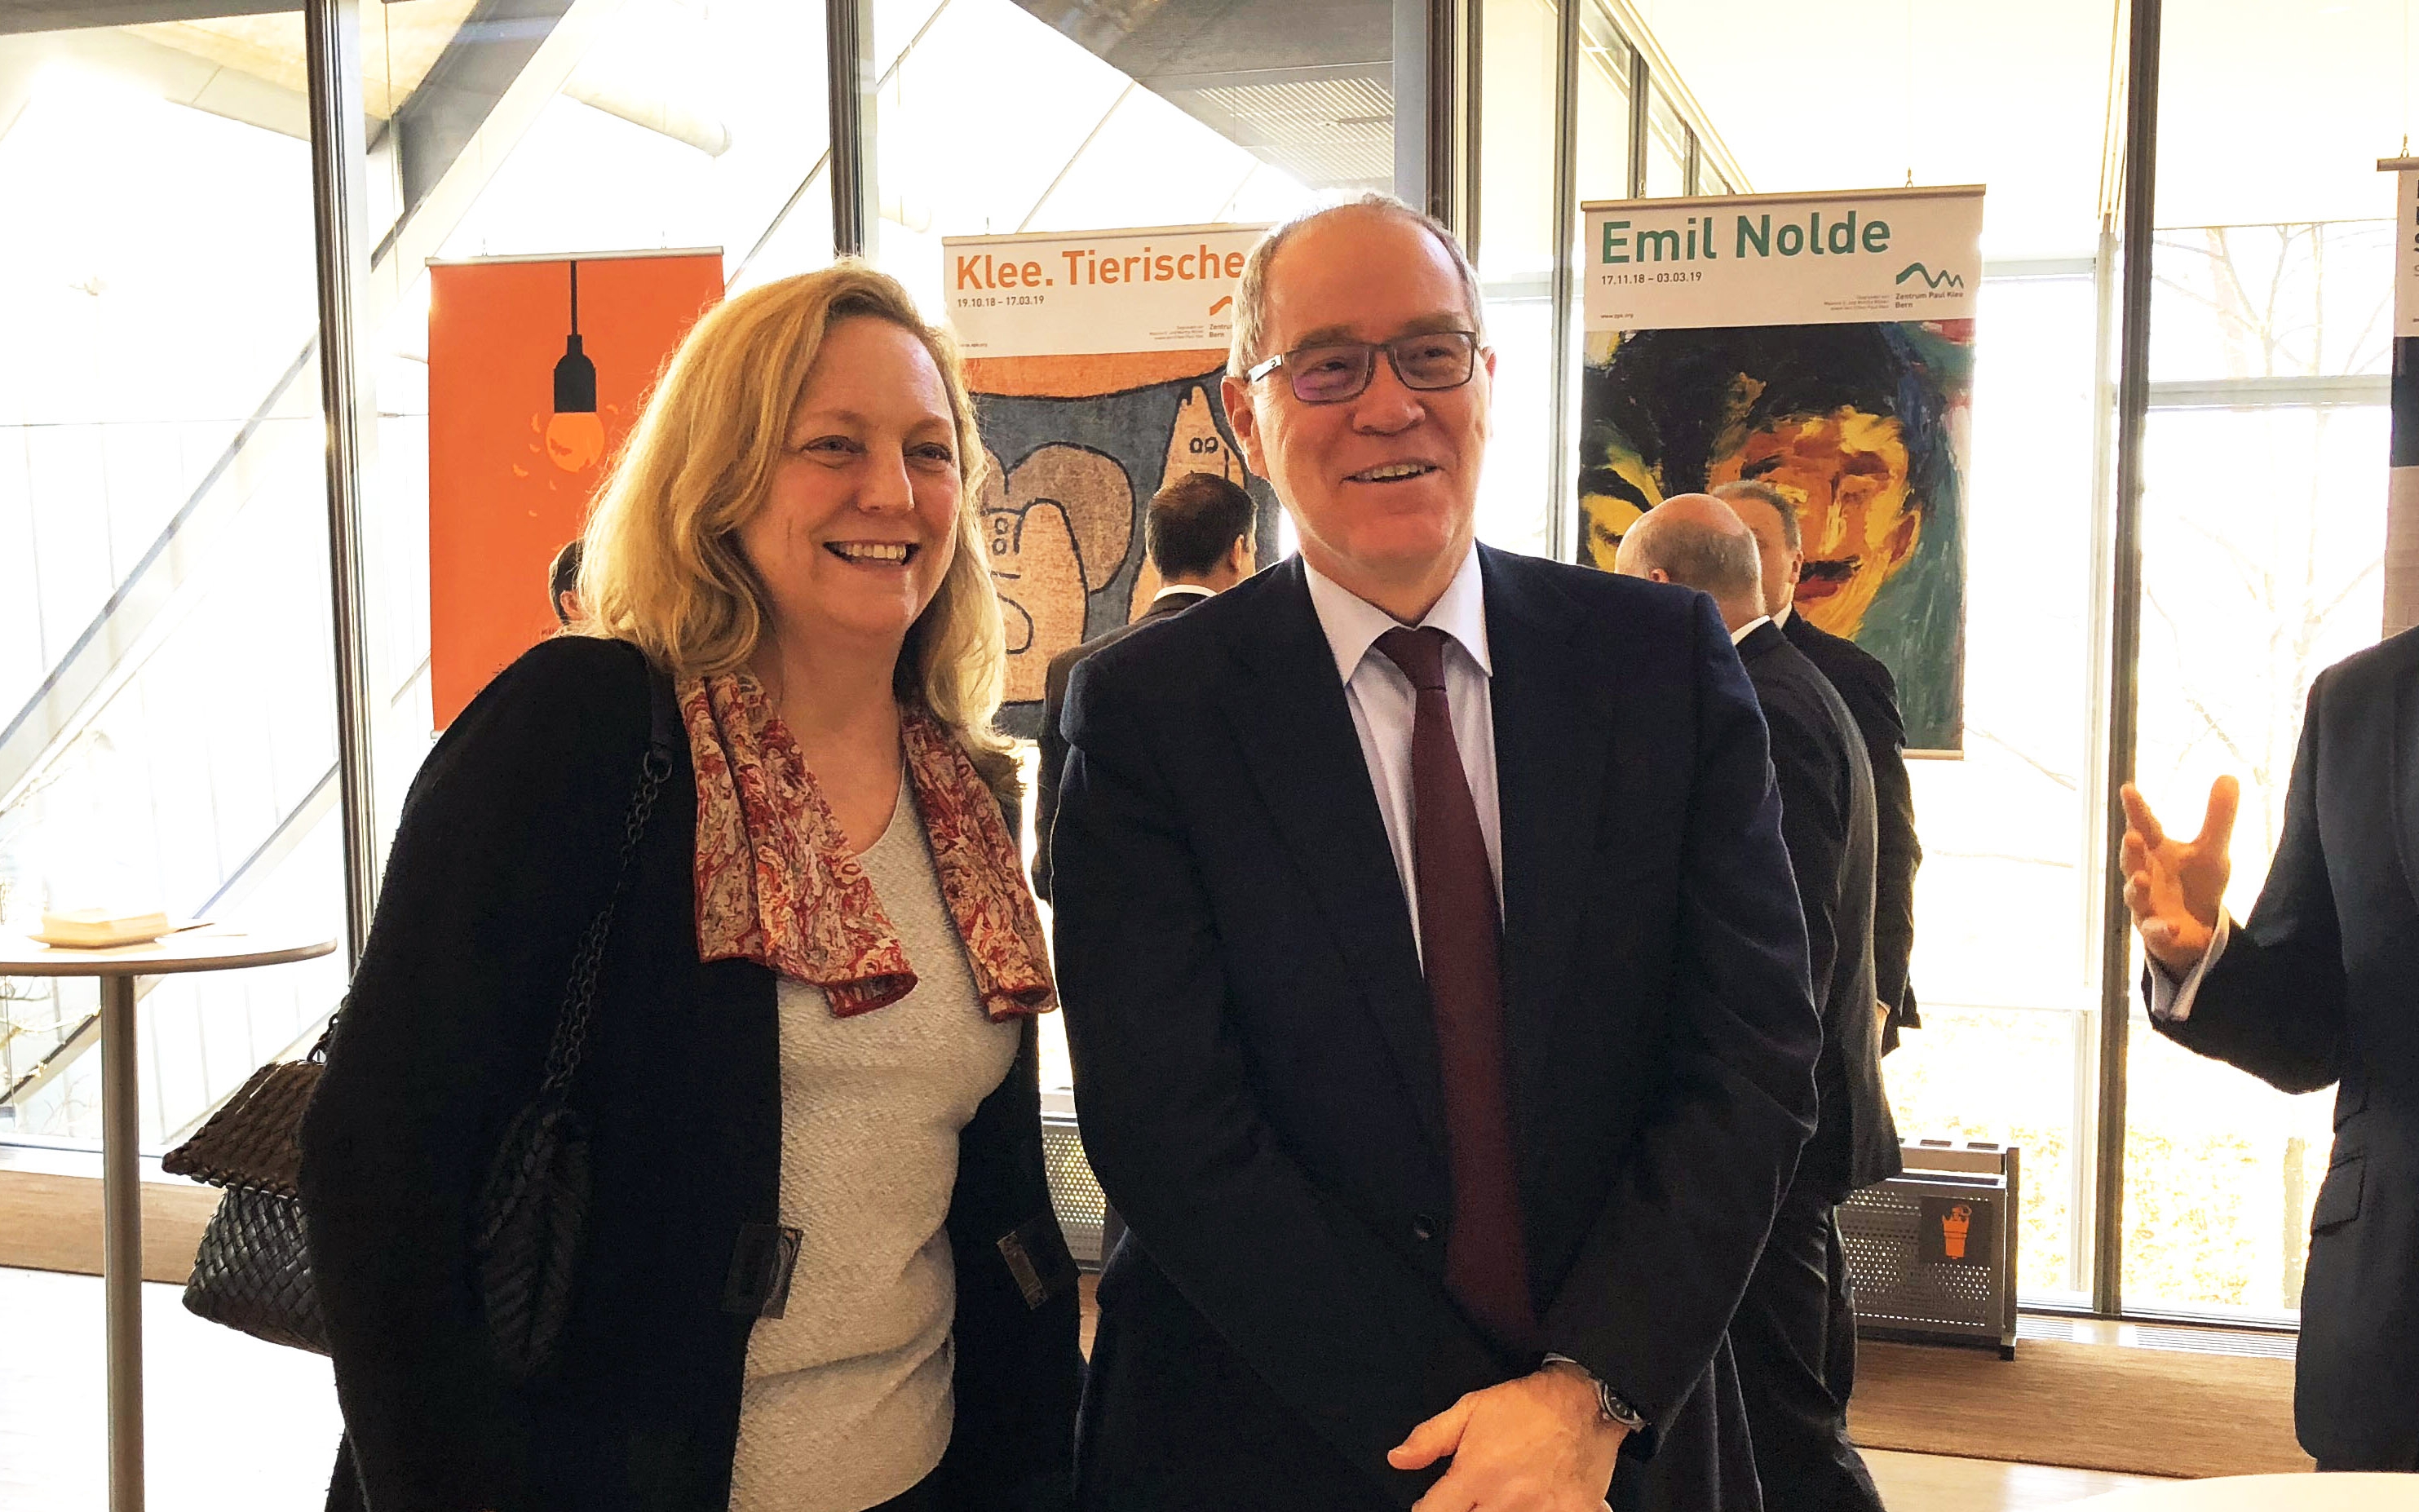 SECO-IFC Partnership Meeting, January 2019, Bern: Raymund Furrer, Head of Economic Cooperation and Development at SECO, and Karin Finkelston, Vice President of IFC, agreed that the long-standing SECO-IFC partnership serves as a driver for innovation by finding scalable solutions and bringing key players together.